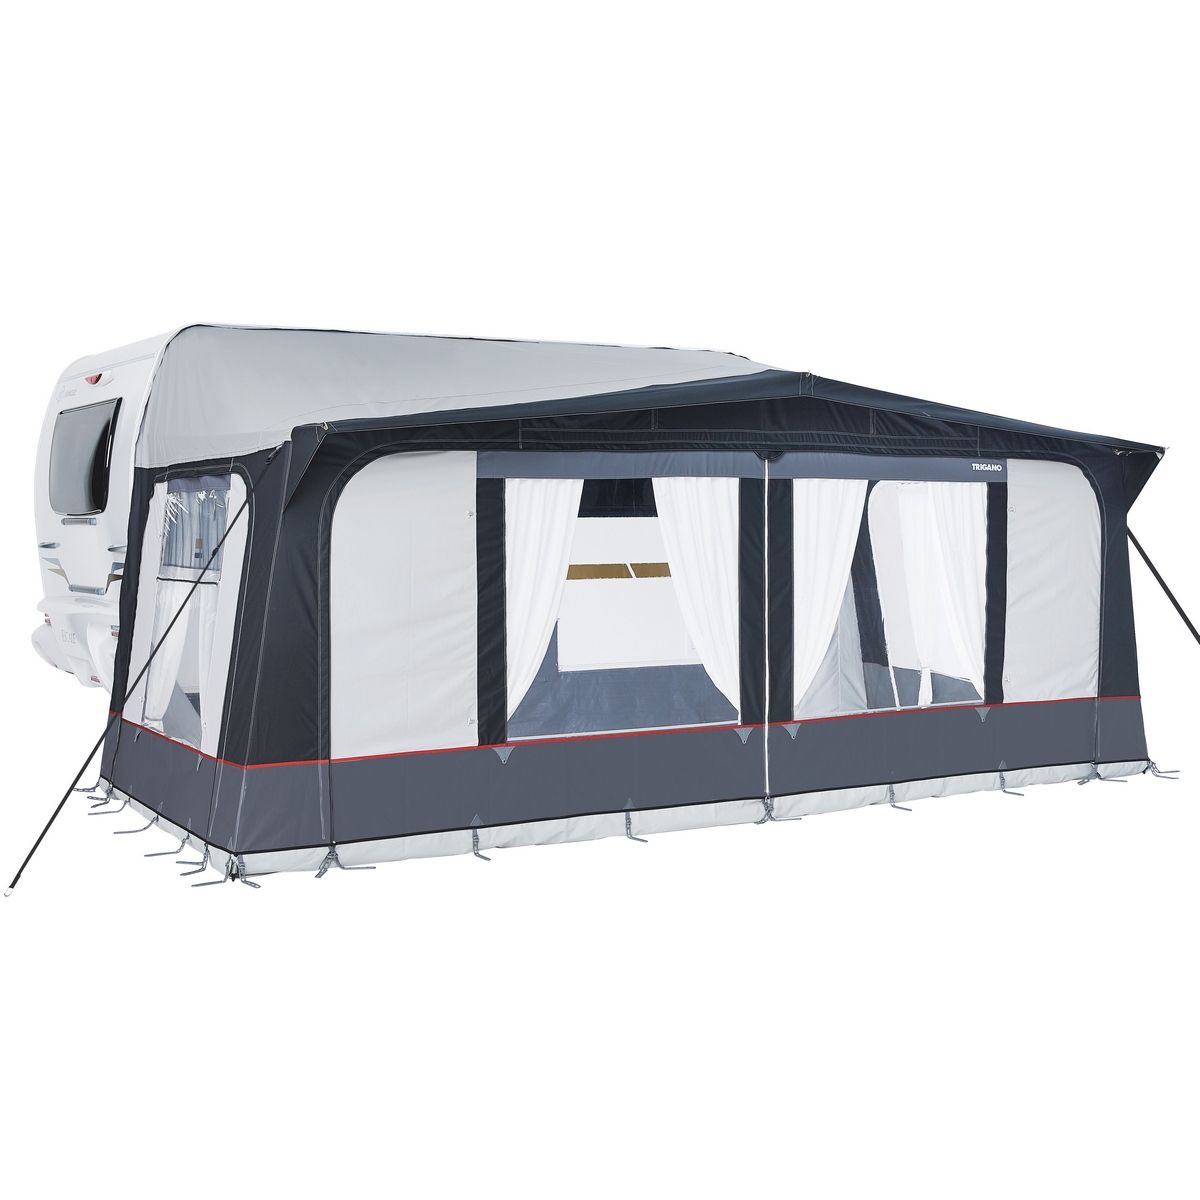 AWNING TENT POLE STORAGE BAG for caravan awning frame cover 